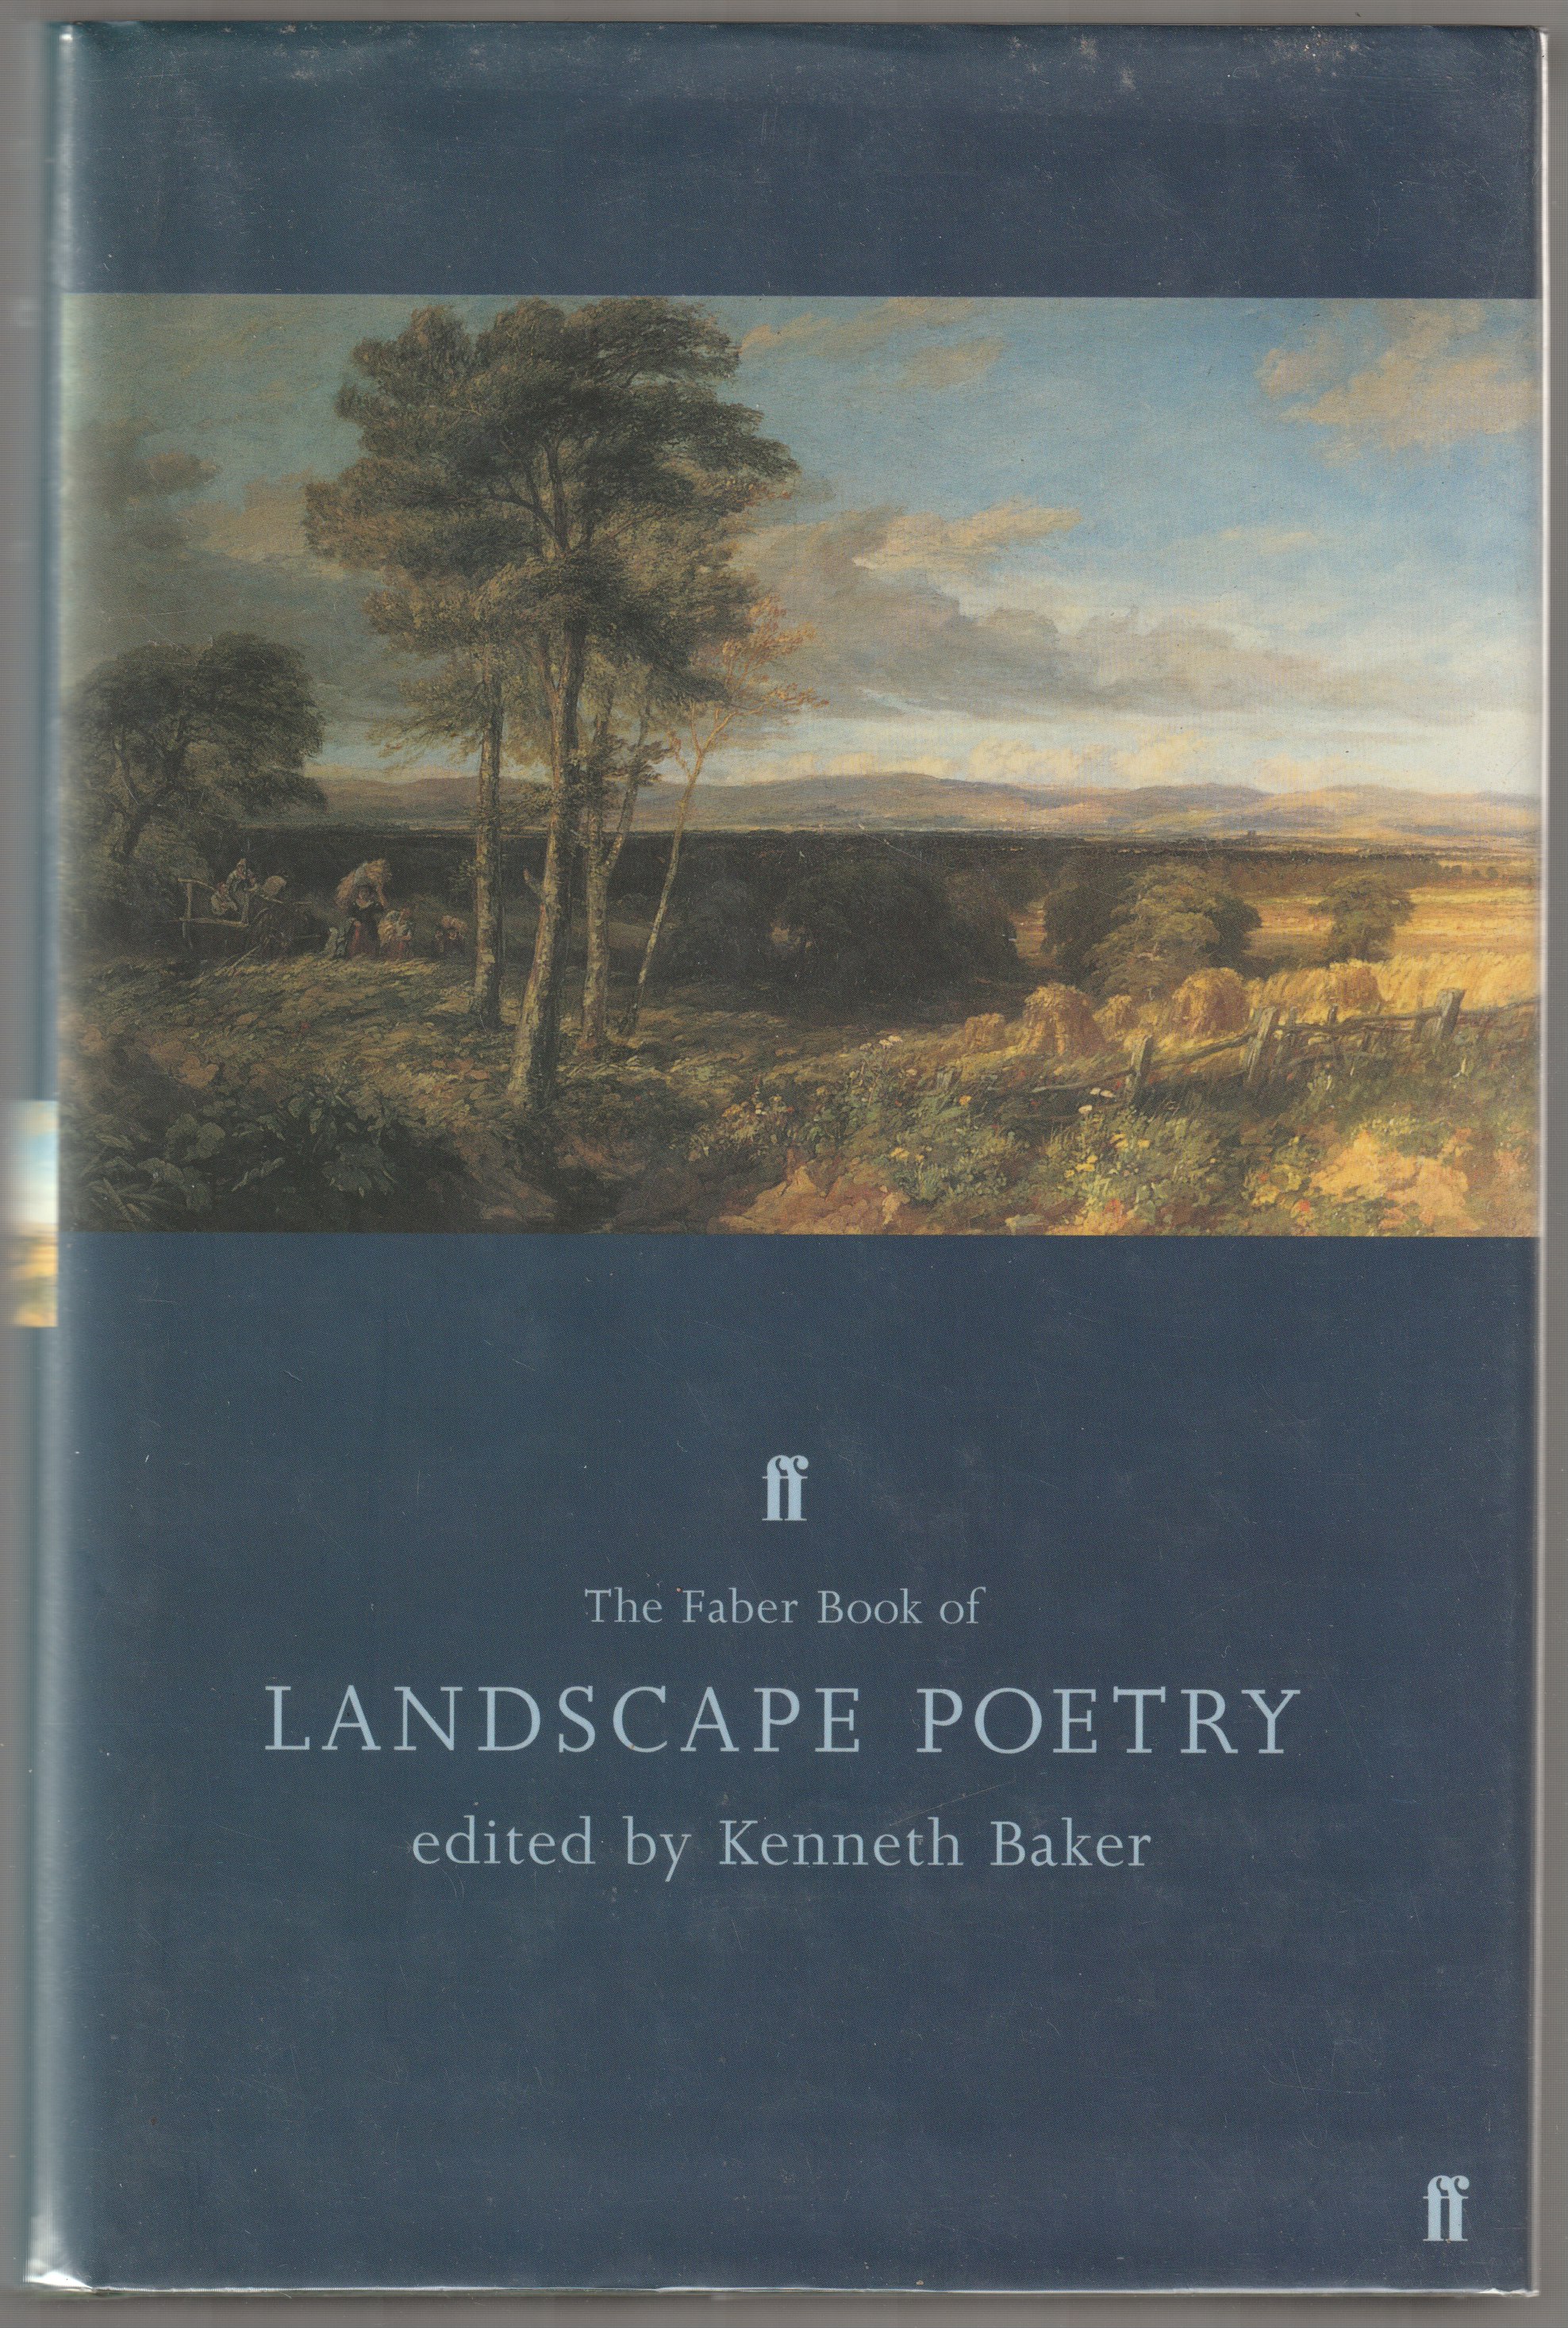 The Faber book of landscape poetry.